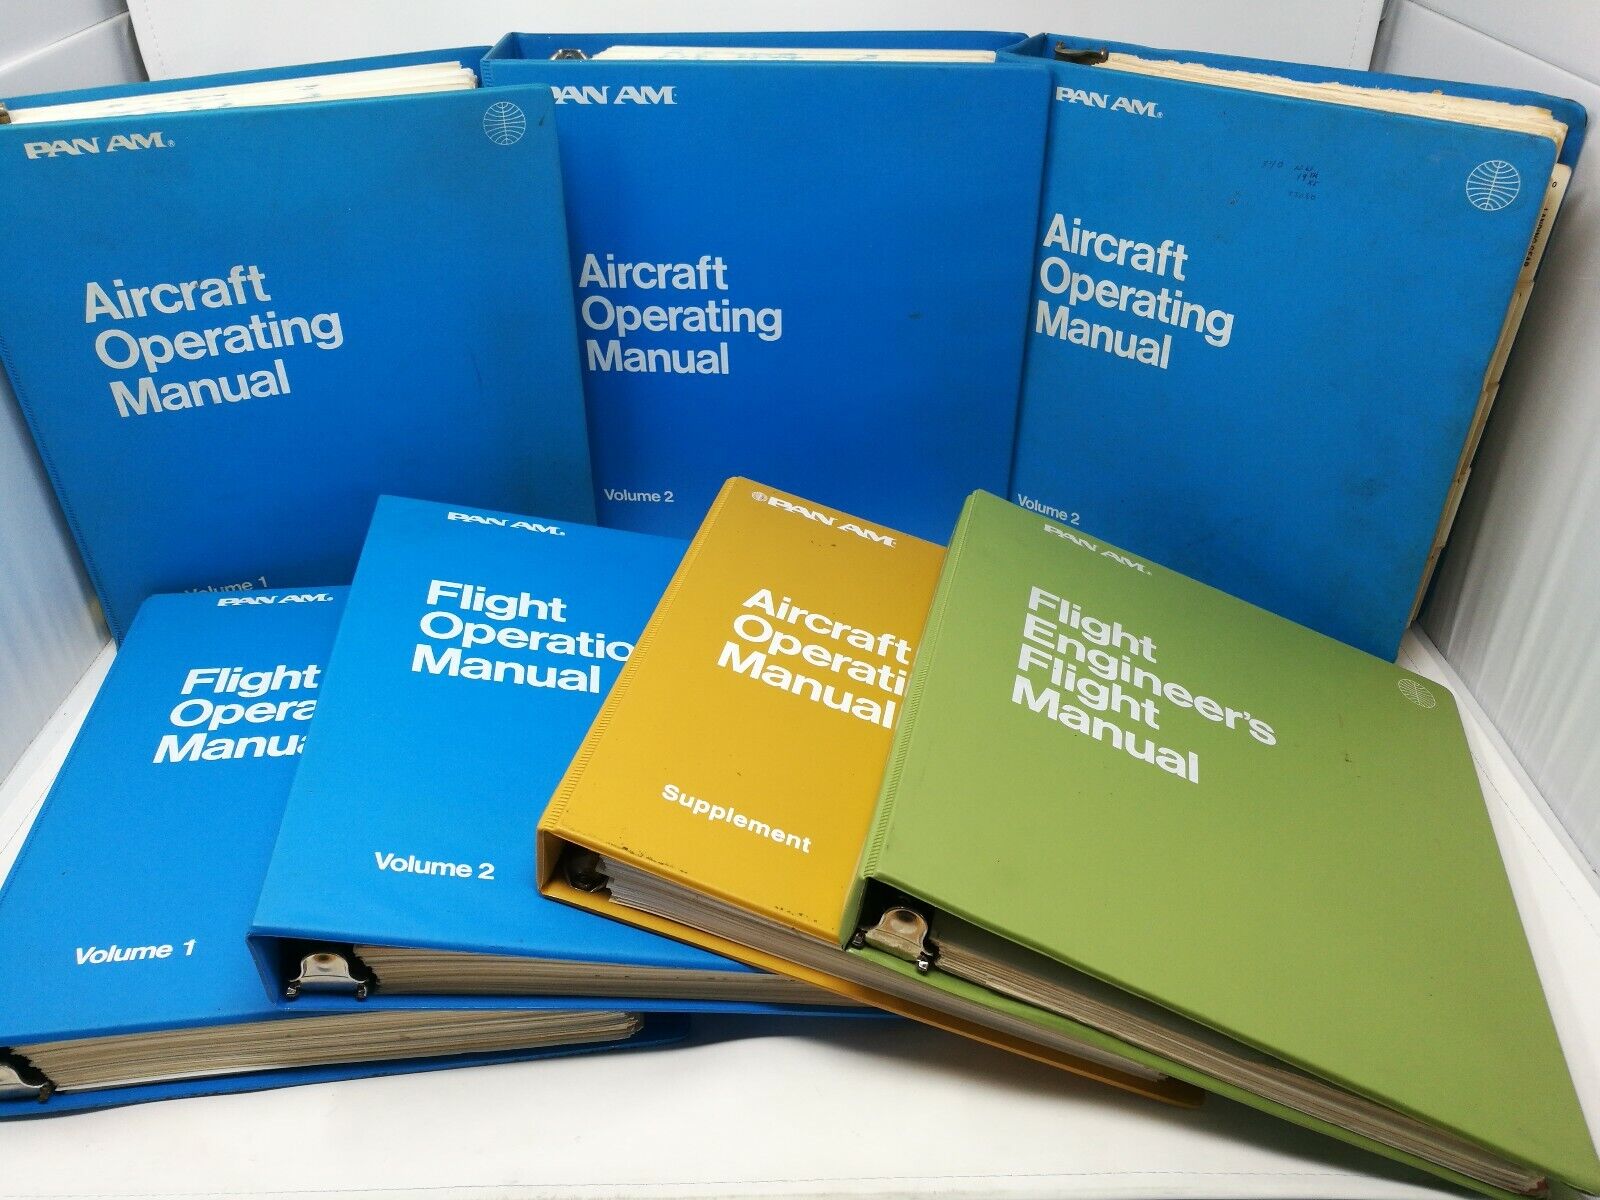 HOLY GRAIL PAN AM Airline 727 Aircraft Manuals Collection